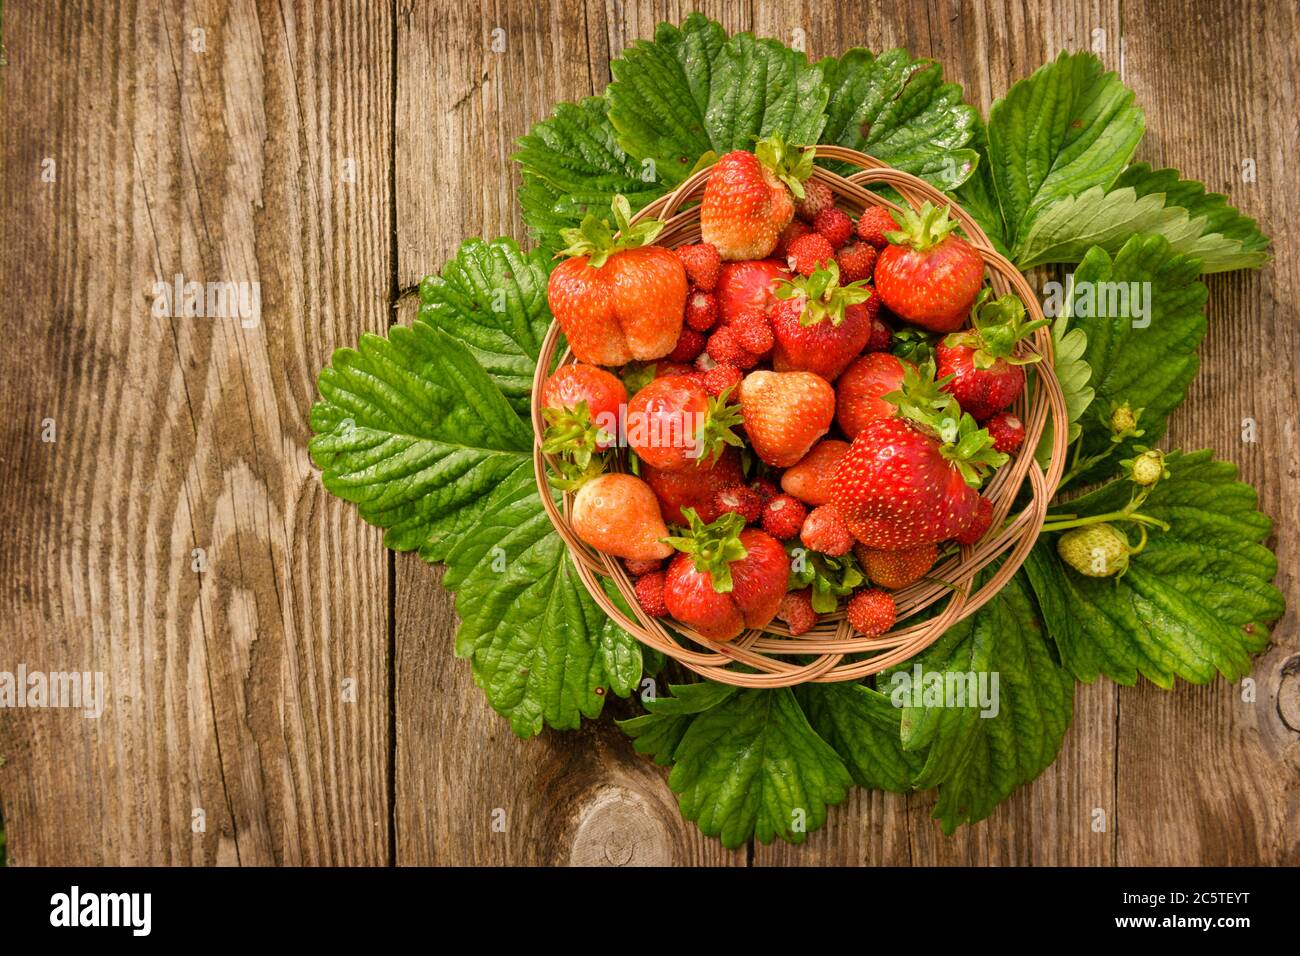 Ripe, juicy and red, strawberry in a plate close-up, on a wooden background. Stock Photo